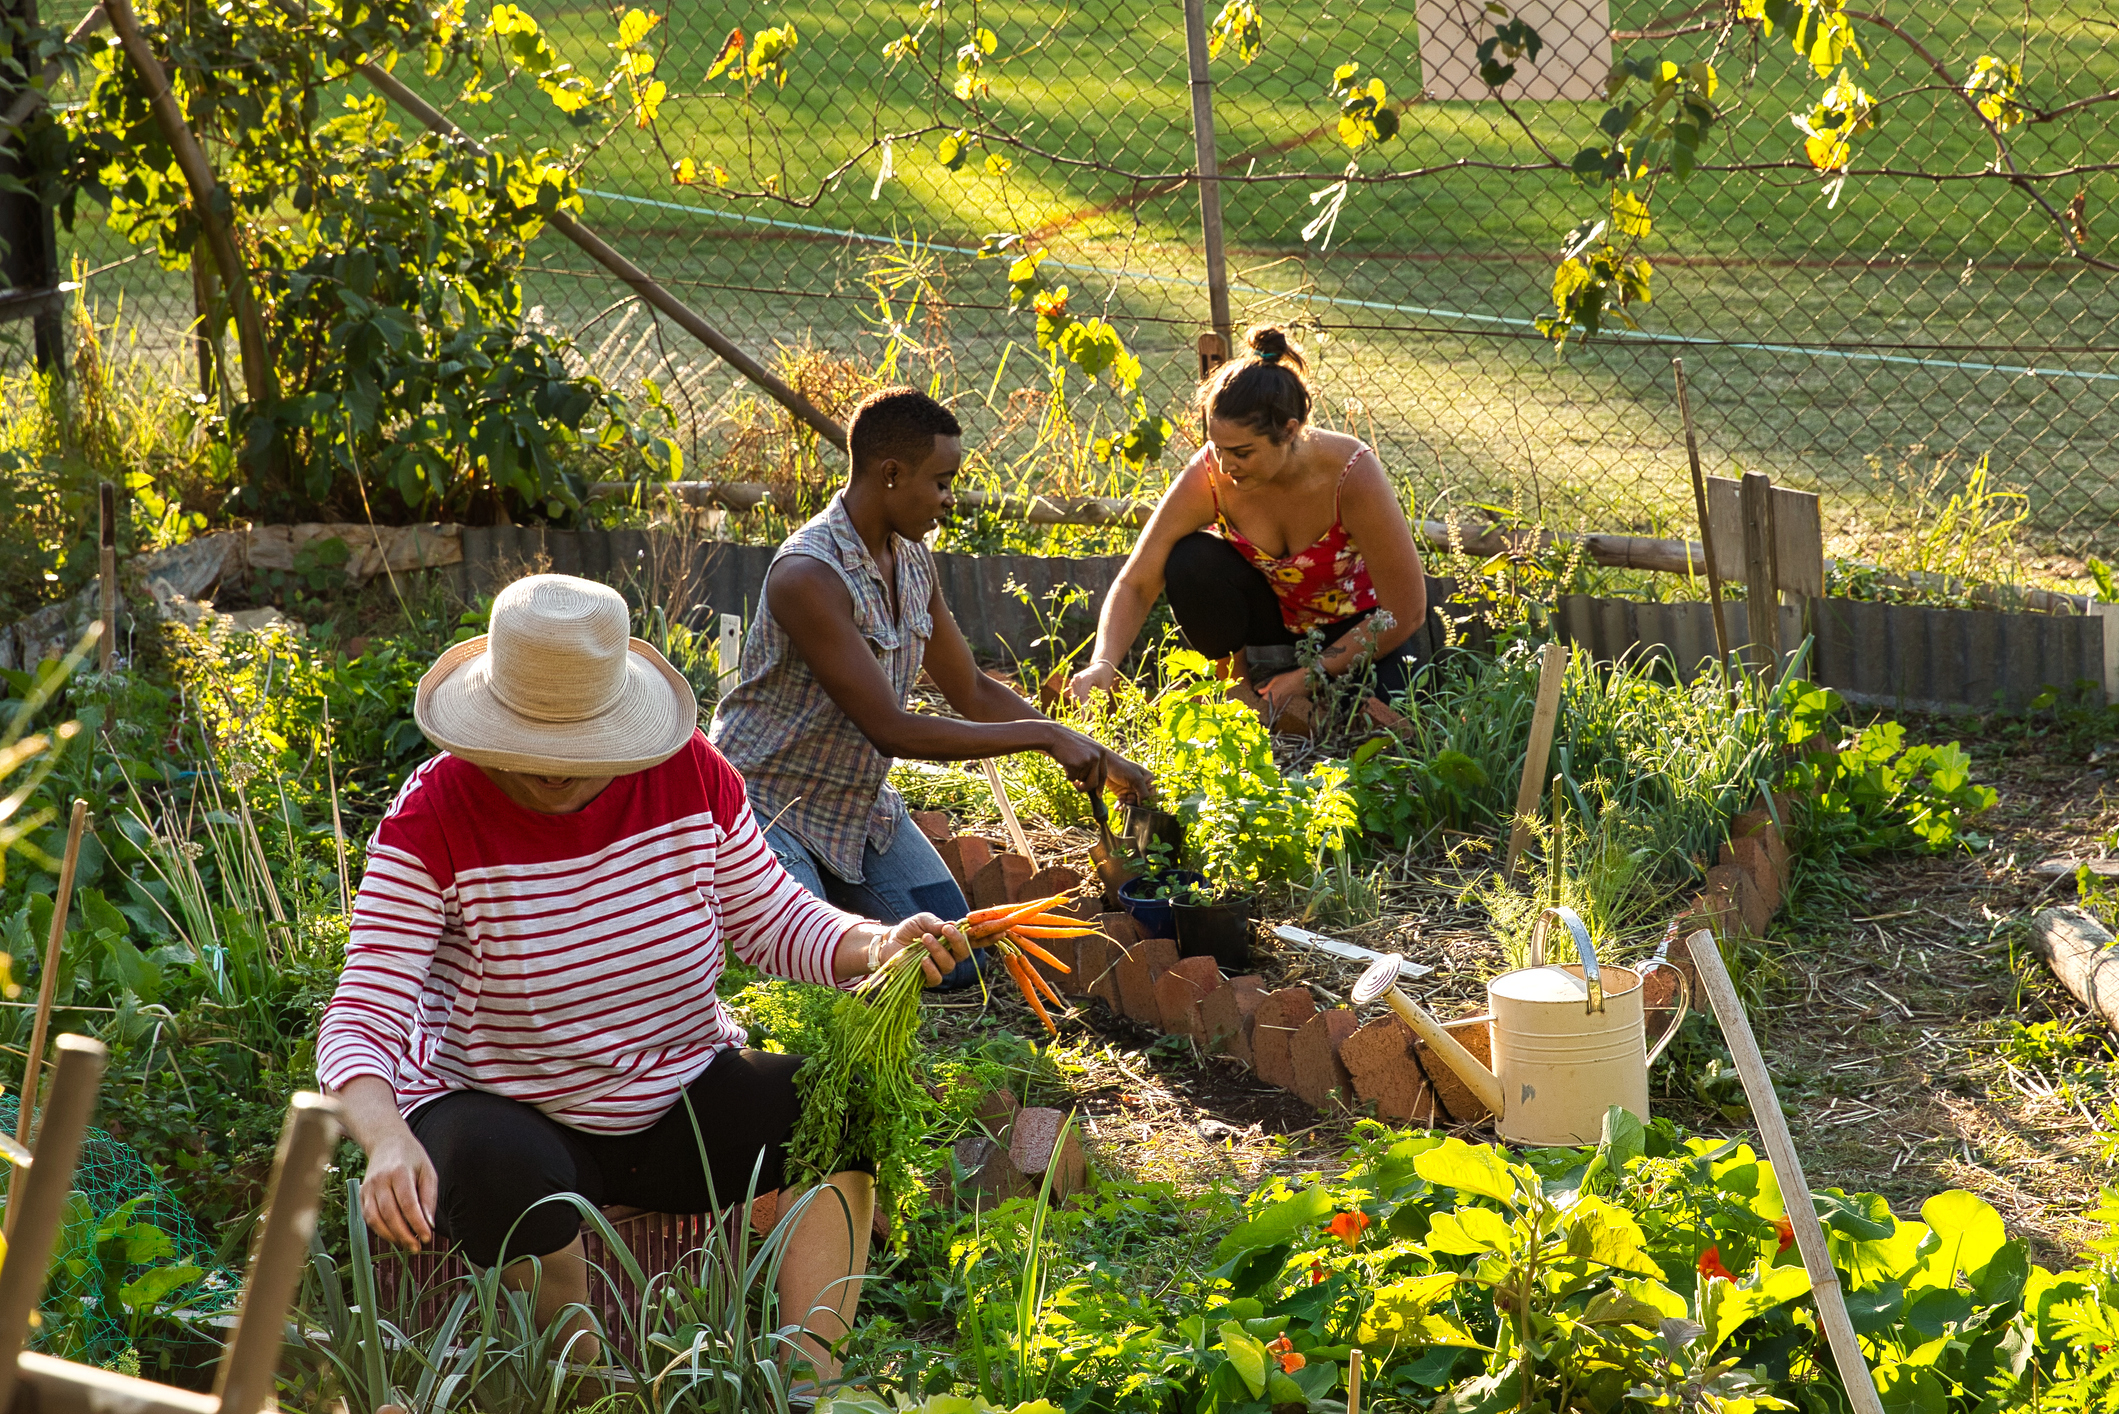 Group of three woman on mixed heritage preparing, weeding and collecting from vegetable beds in a community garden